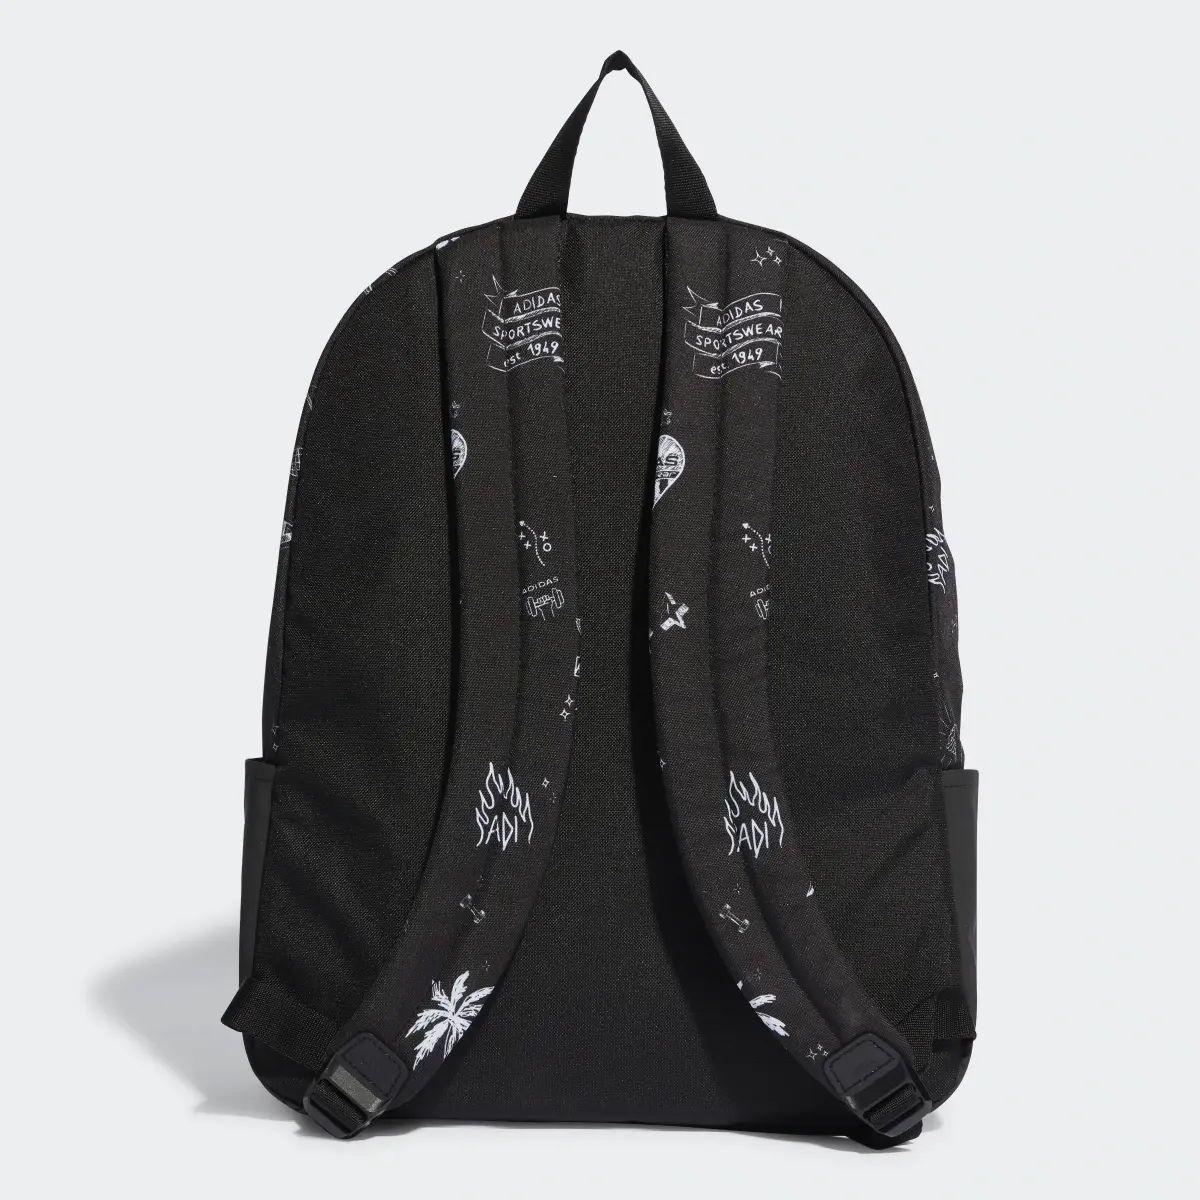 Adidas Classic Graphic Backpack. 3